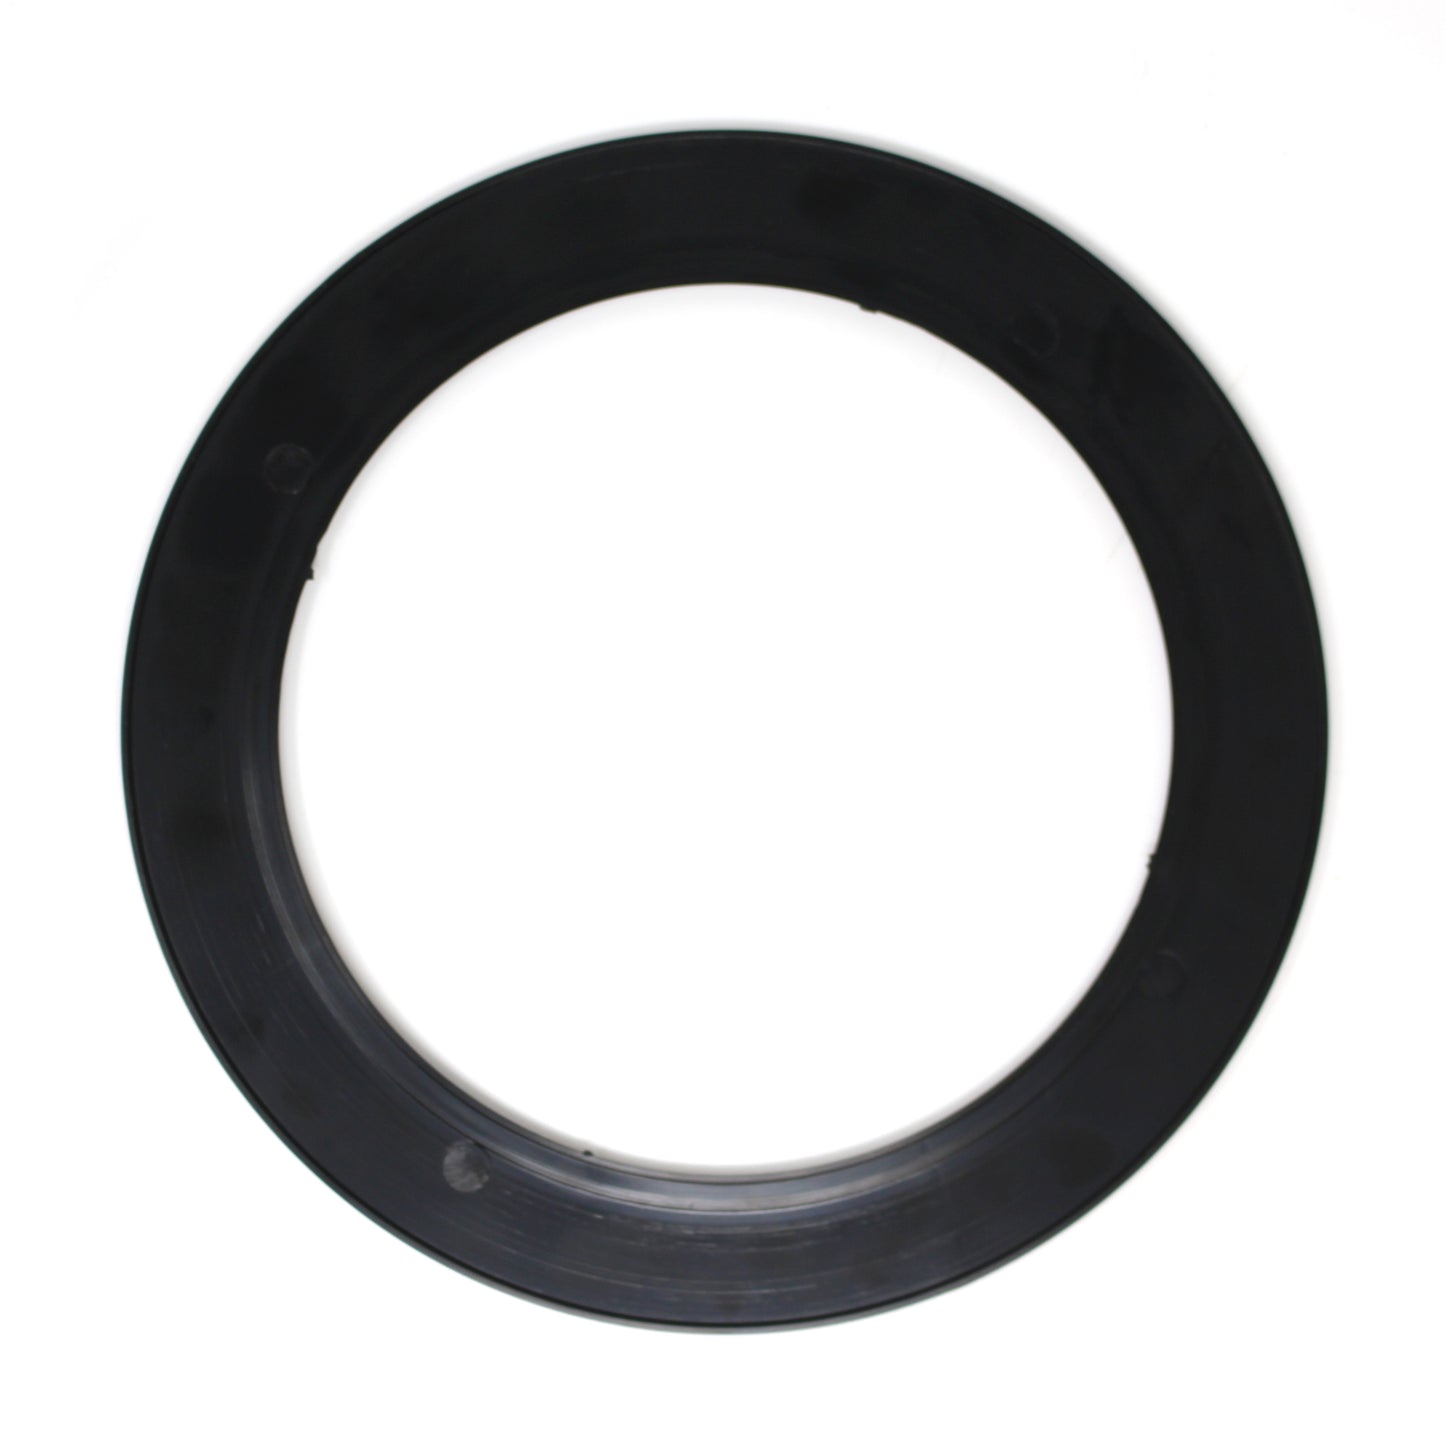 Plastic Black Light Trim Ring Recessed Can 6" Inch Over Size Oversized Lighting Fixture (OD 7 7/8'') (ID 5 7/8'')